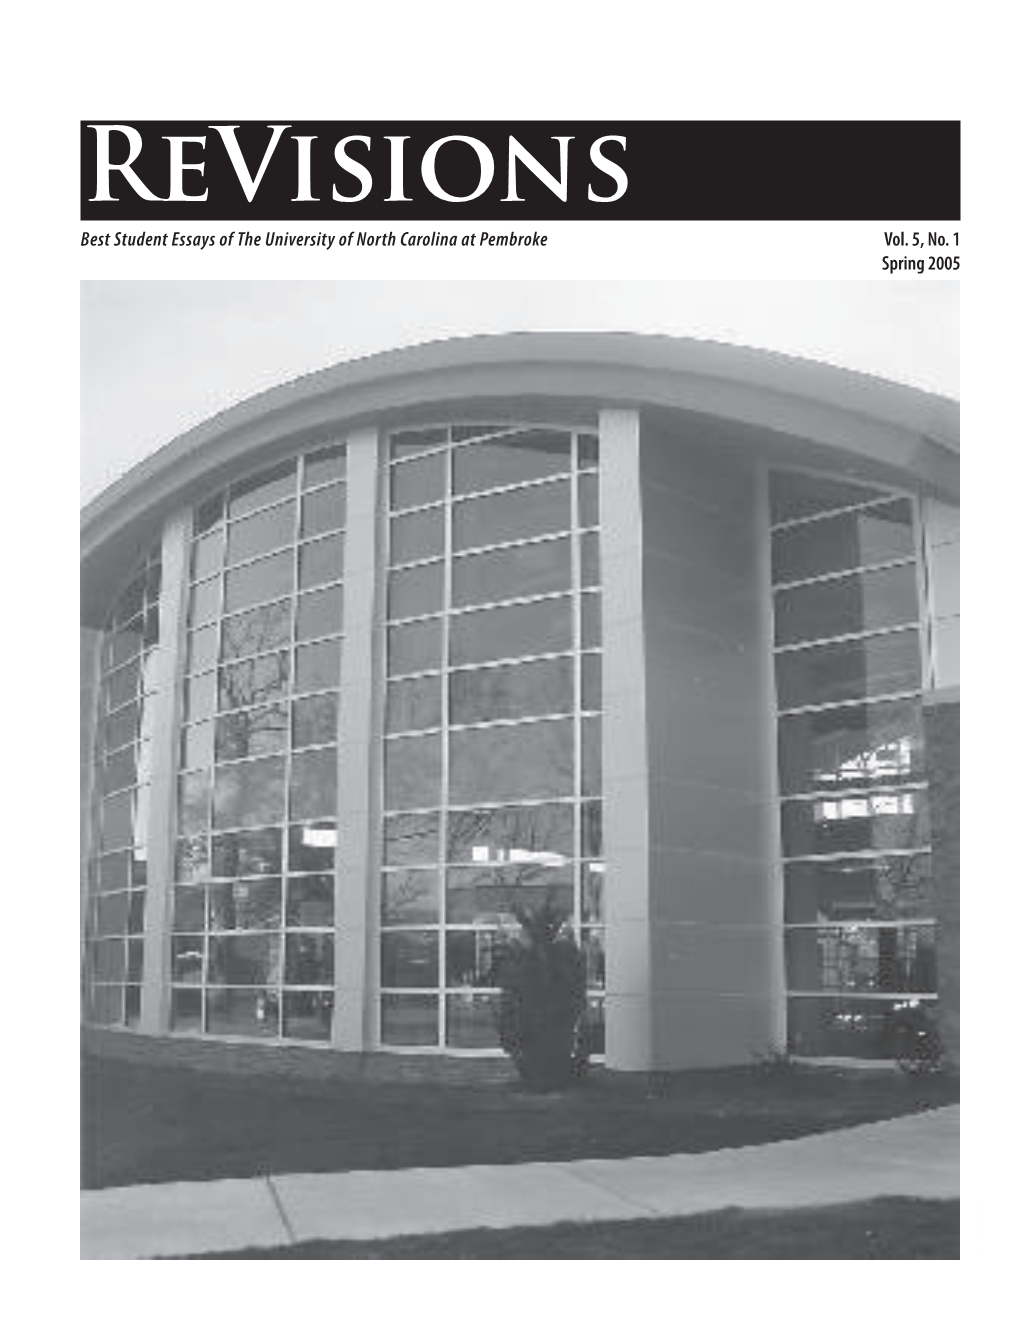 Revisions Best Student Essays of the University of North Carolina at Pembroke Vol